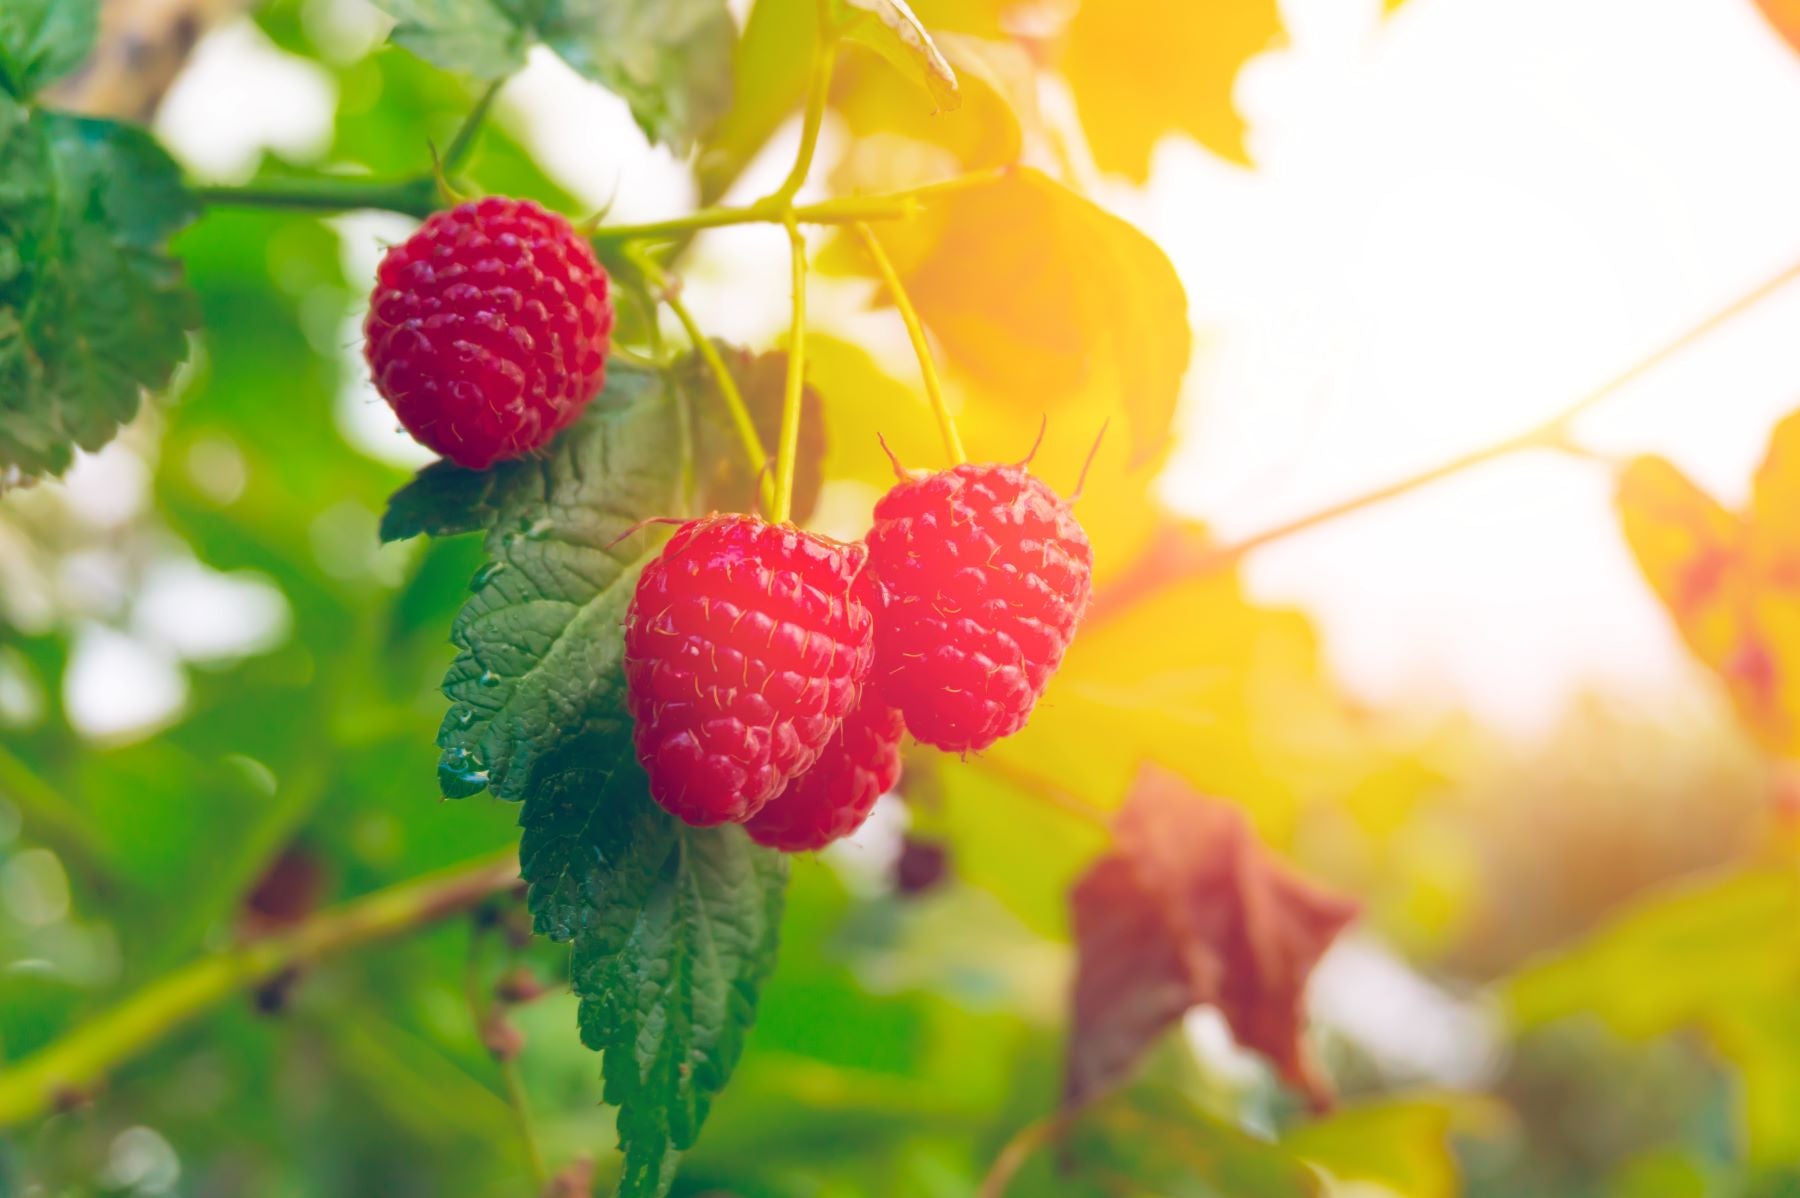 How To Grow and Look After Raspberries